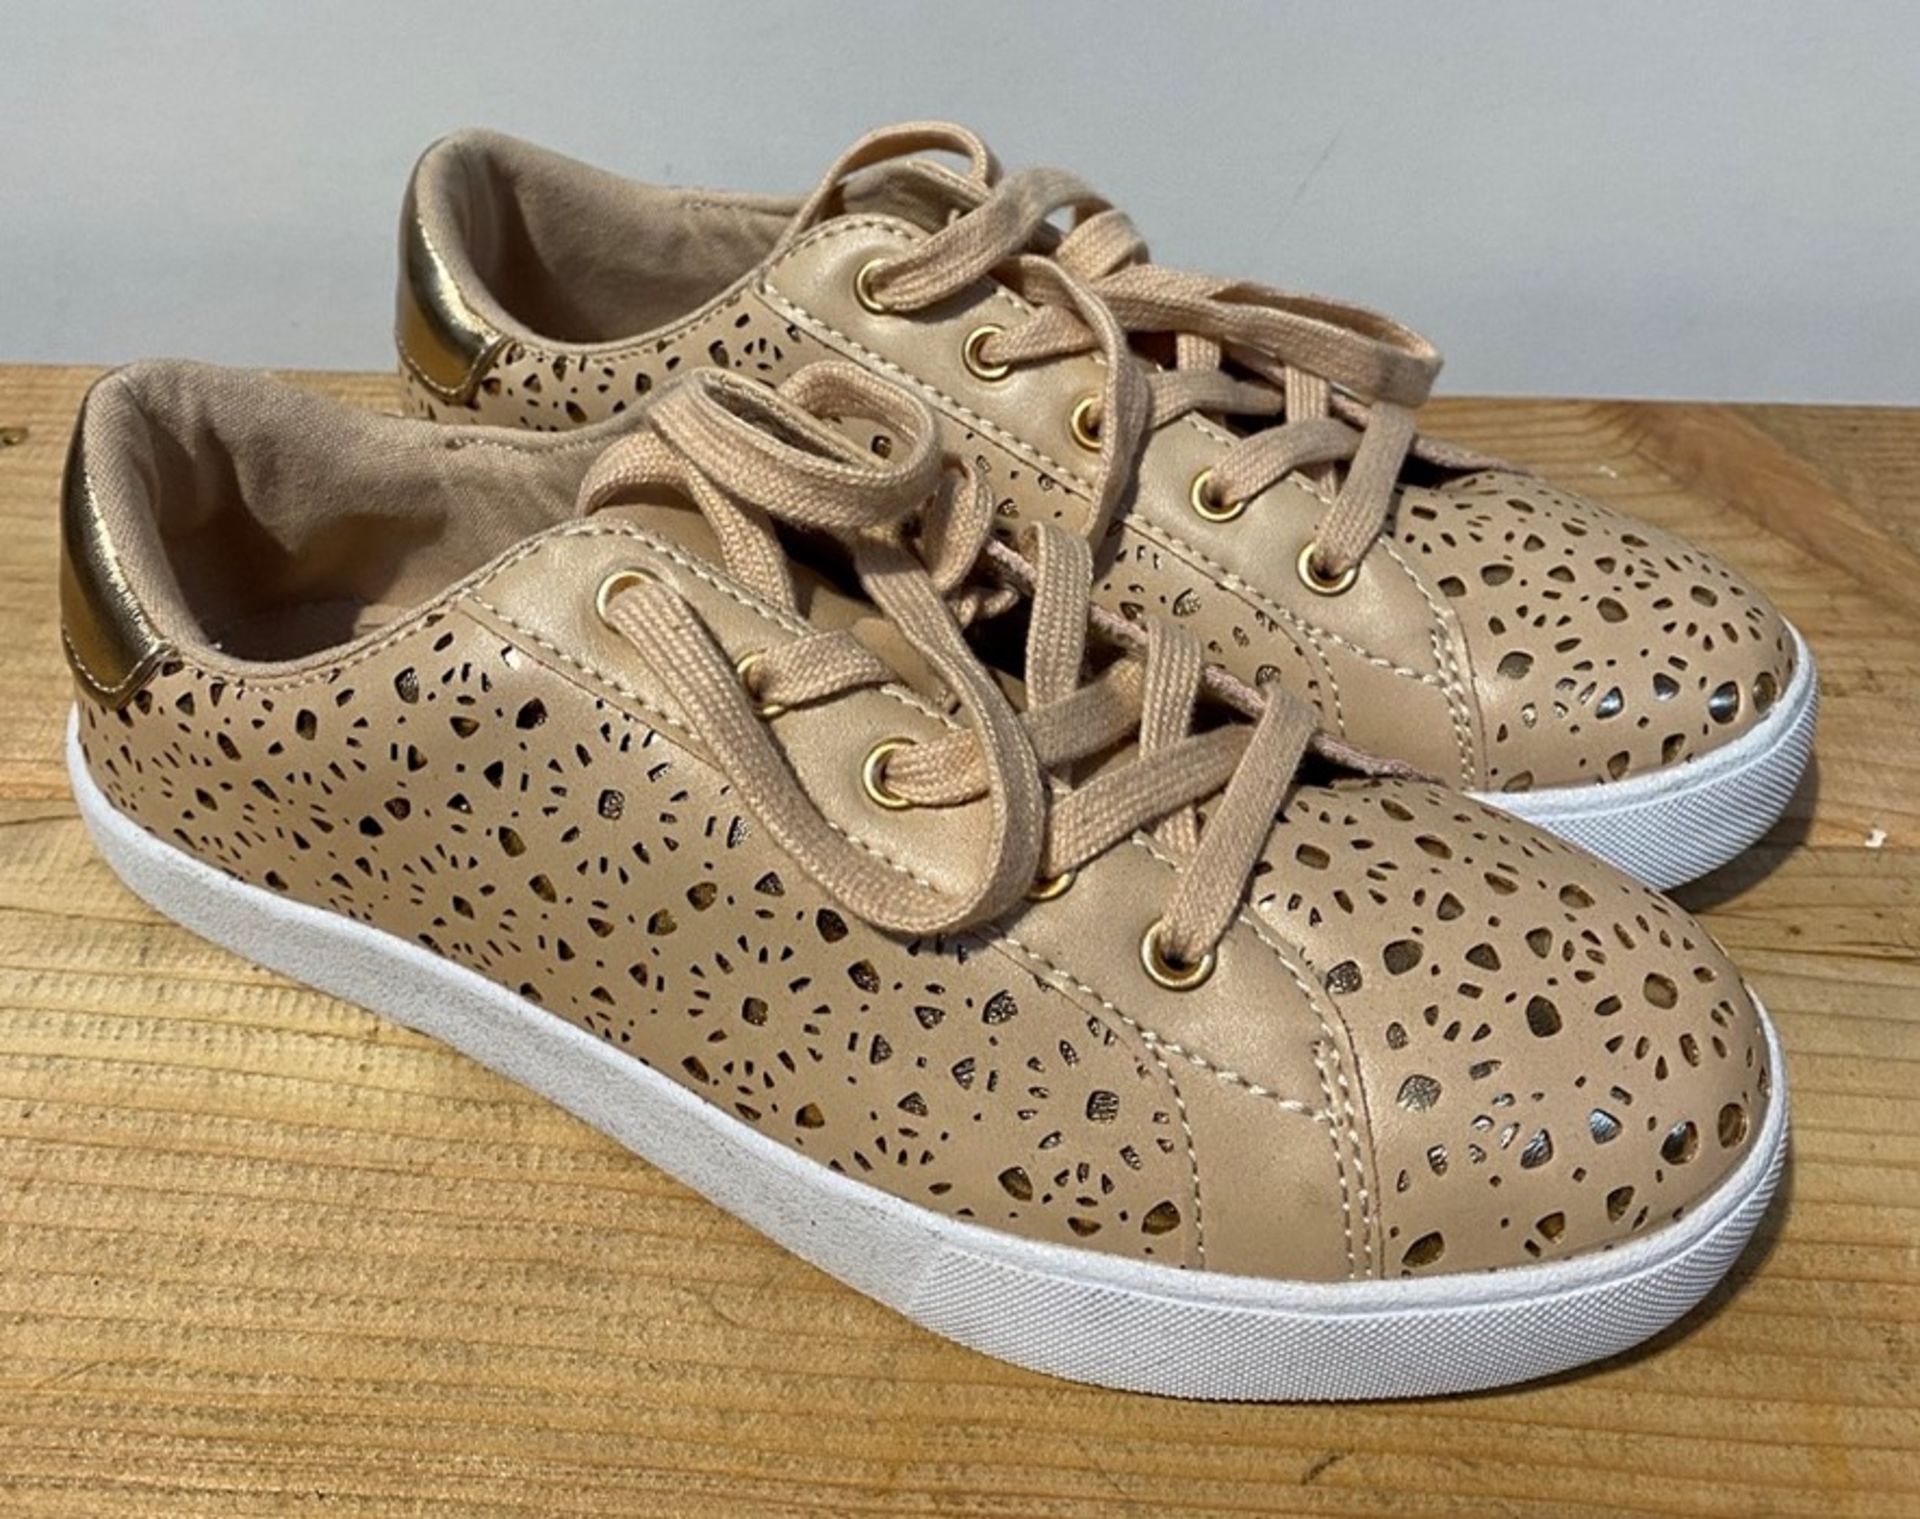 1 PAIR OF WOMEN'S LA REDOUTE FLORAL PERFORATED METALLIC HEEL TRAINERS IN NUDE / SIZE: 5 3/4 / RRP £